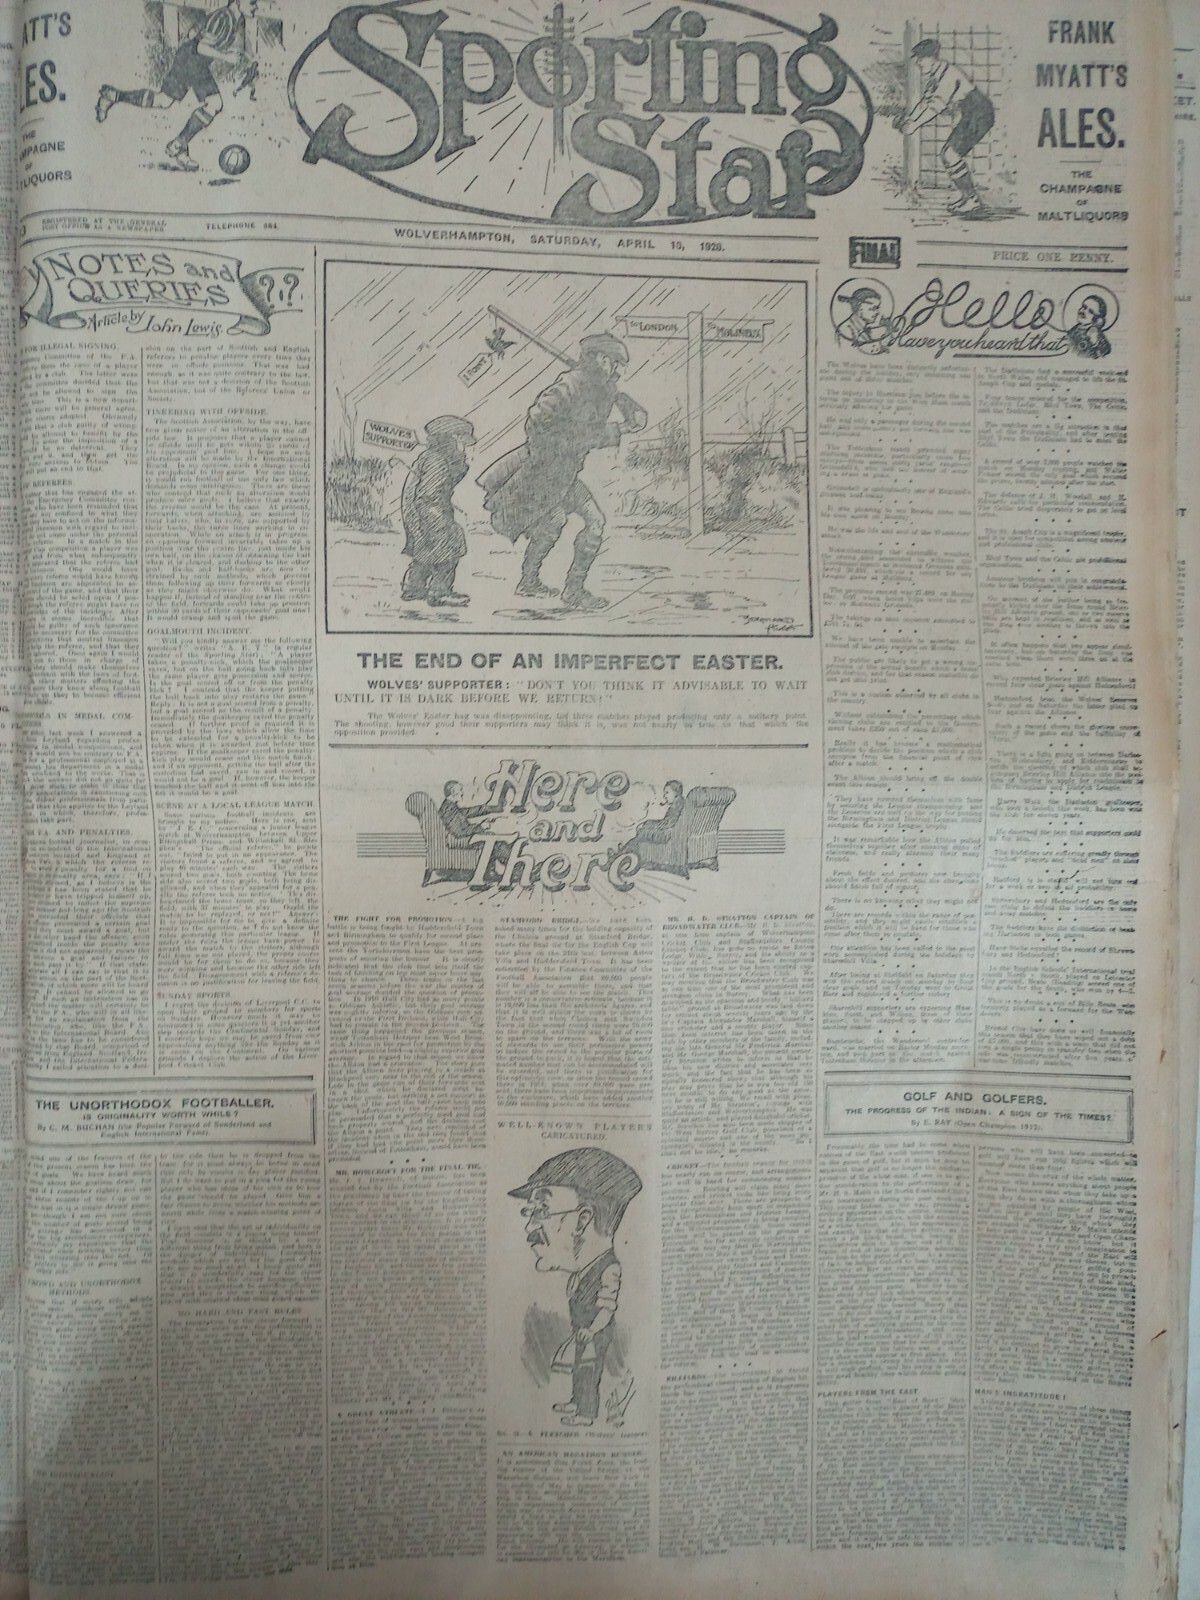 April 10, 1920 - Albion win title, but it doesn't make front page